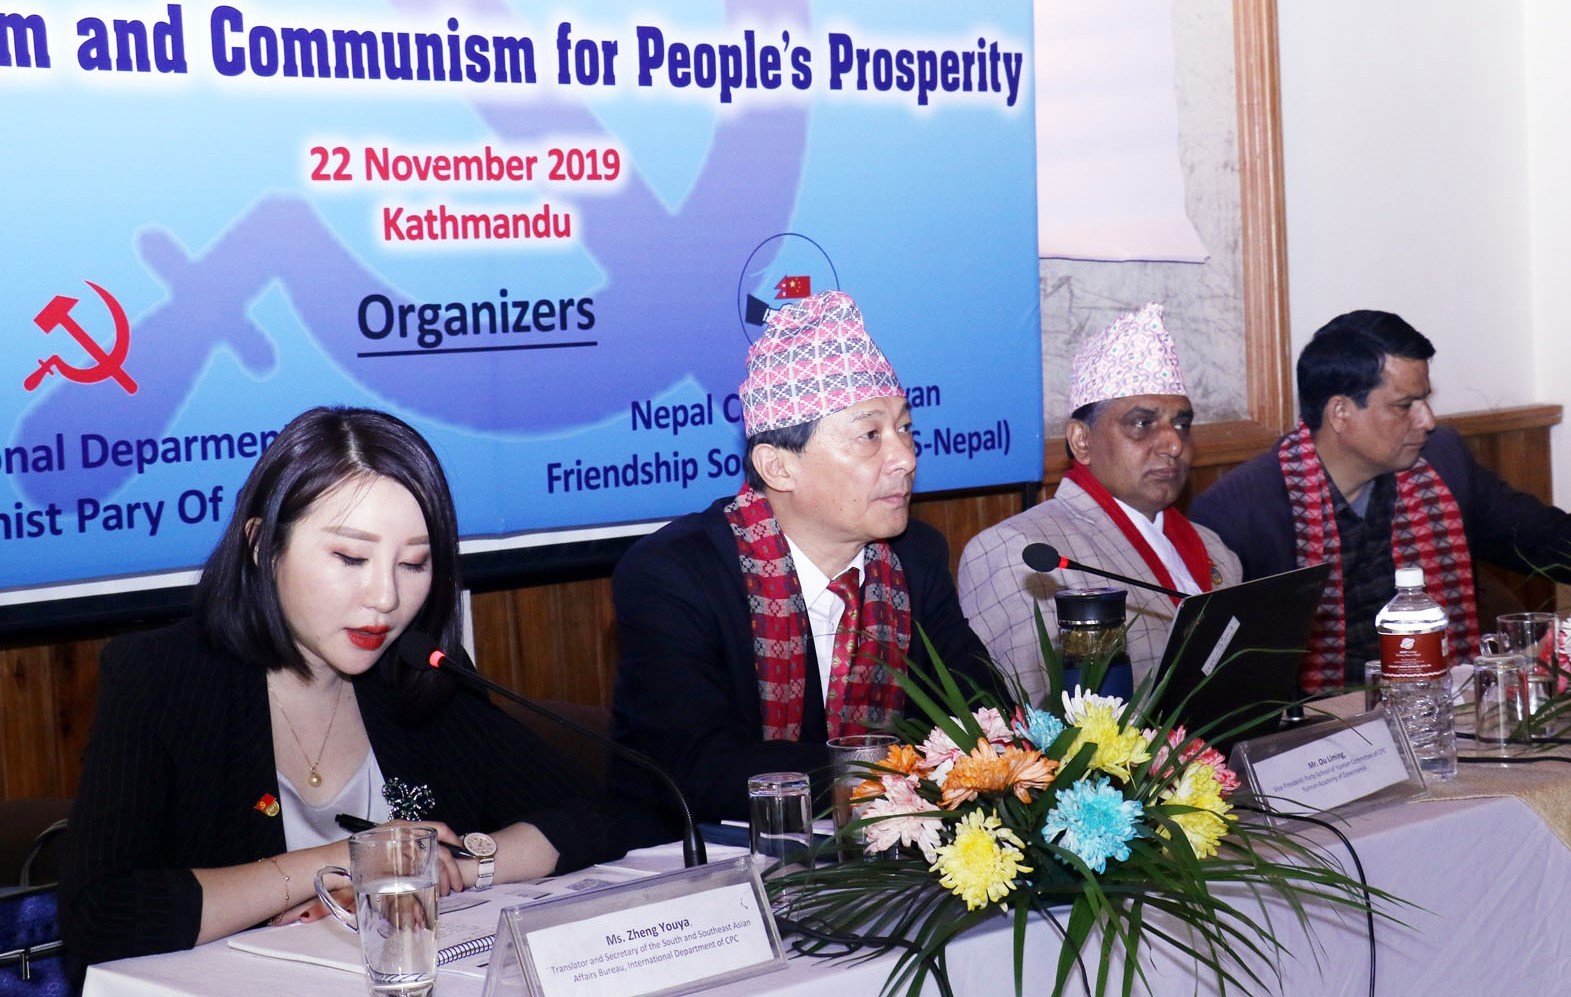 xis-thought-will-be-helpful-in-nepals-progress-minister-nembang